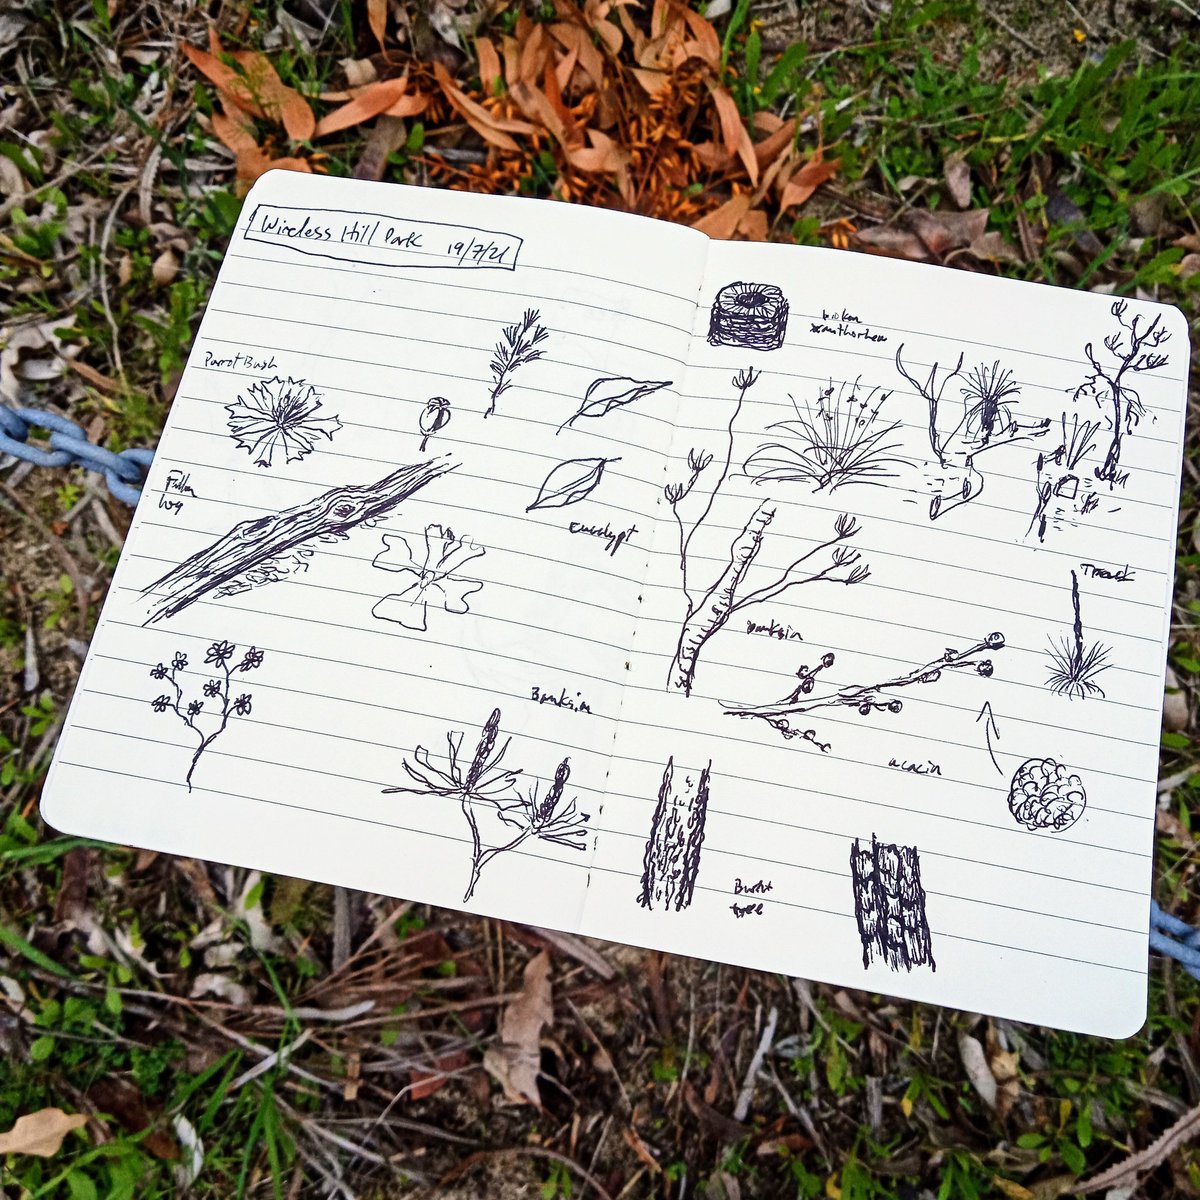 Did some nature journaling on today's family outing to #wirelesshillpark 
#naturejournal #sciart #natureart #scicomm #australianplants